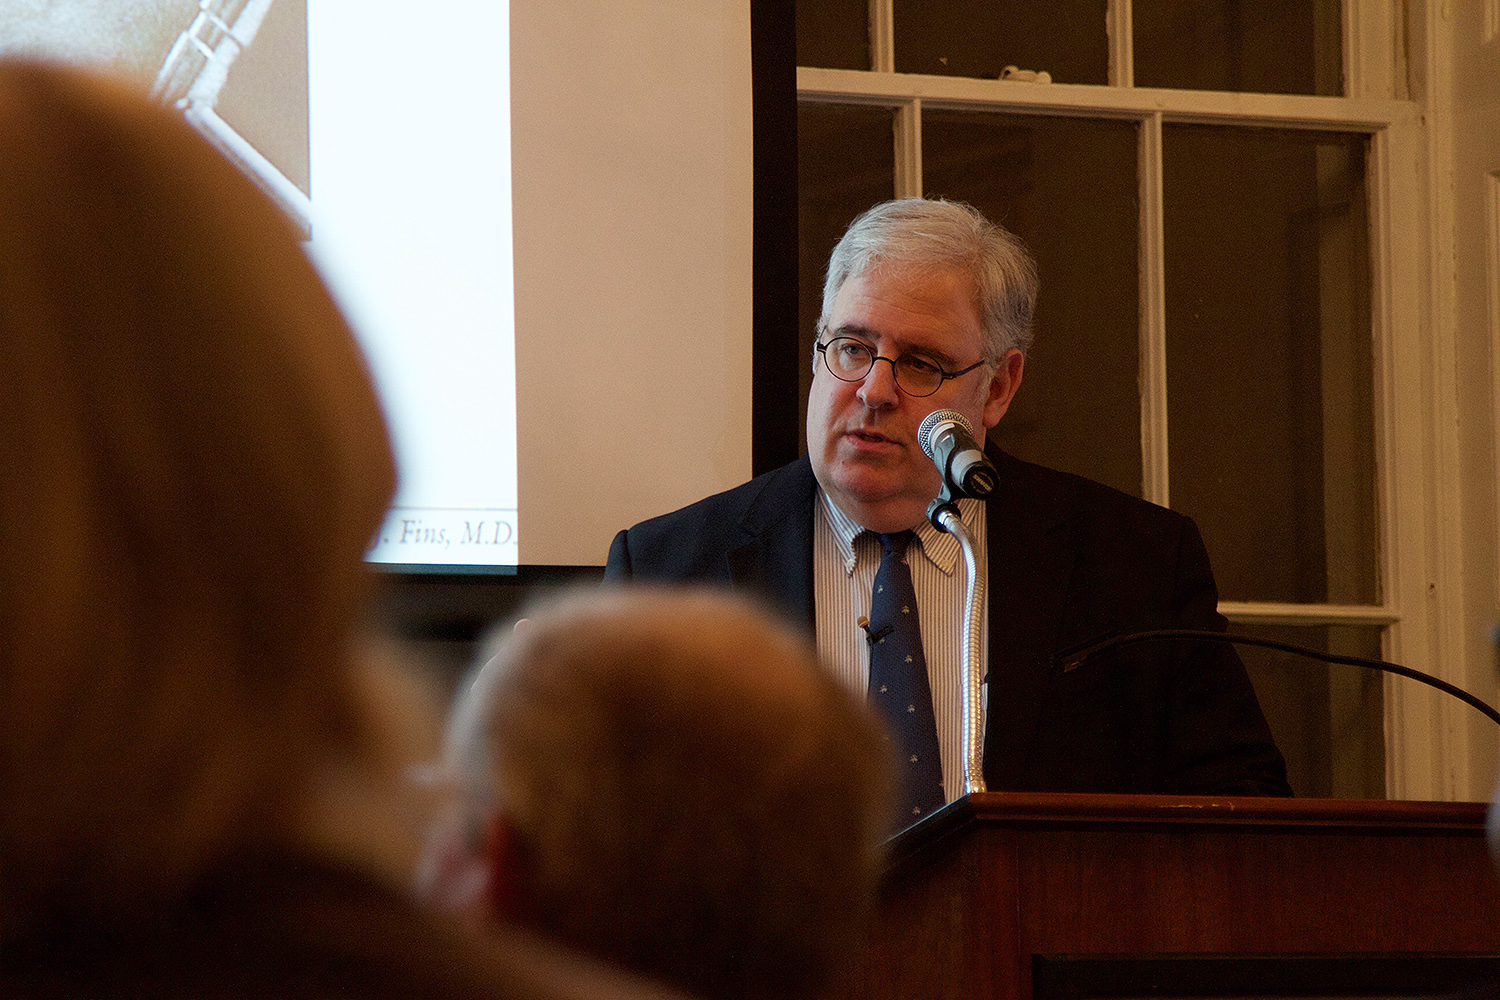 Former Wesleyan Trustee Dr. Joseph Fins, M.D. ’82 returned to campus Nov. 5 to speak on “Giving Voice to Consciousness: Neuroscience, Neuroethics and the Law" as part of the Russell House Series on Prose and Poetry. Several students and faculty attended the talk.